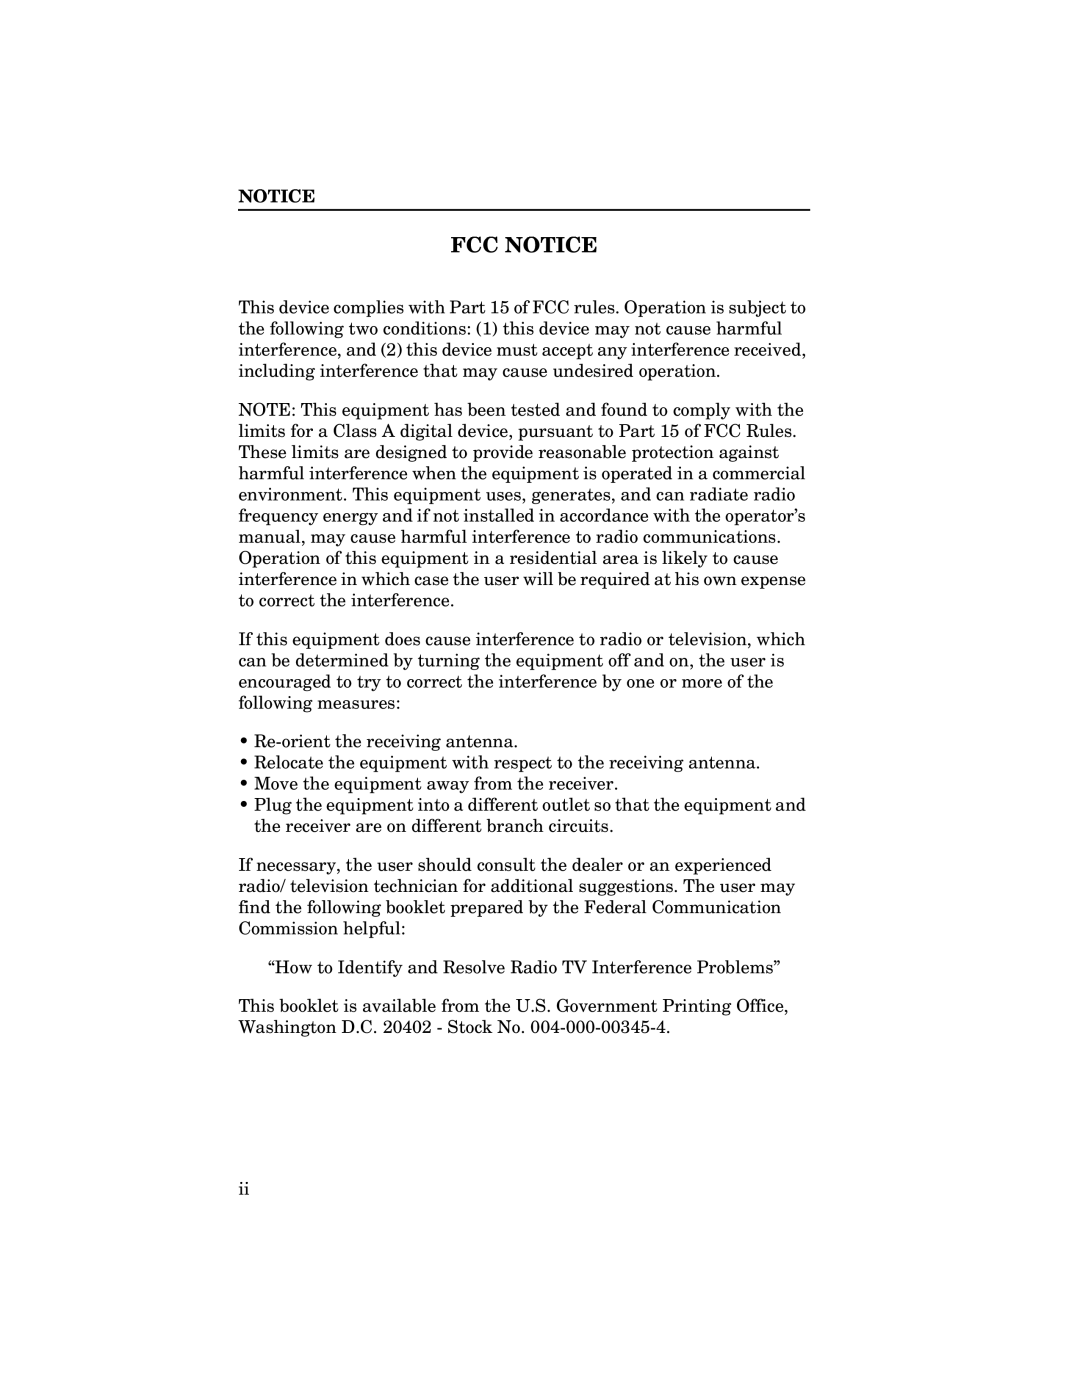 Cabletron Systems THN-MIM manual Fcc Notice 